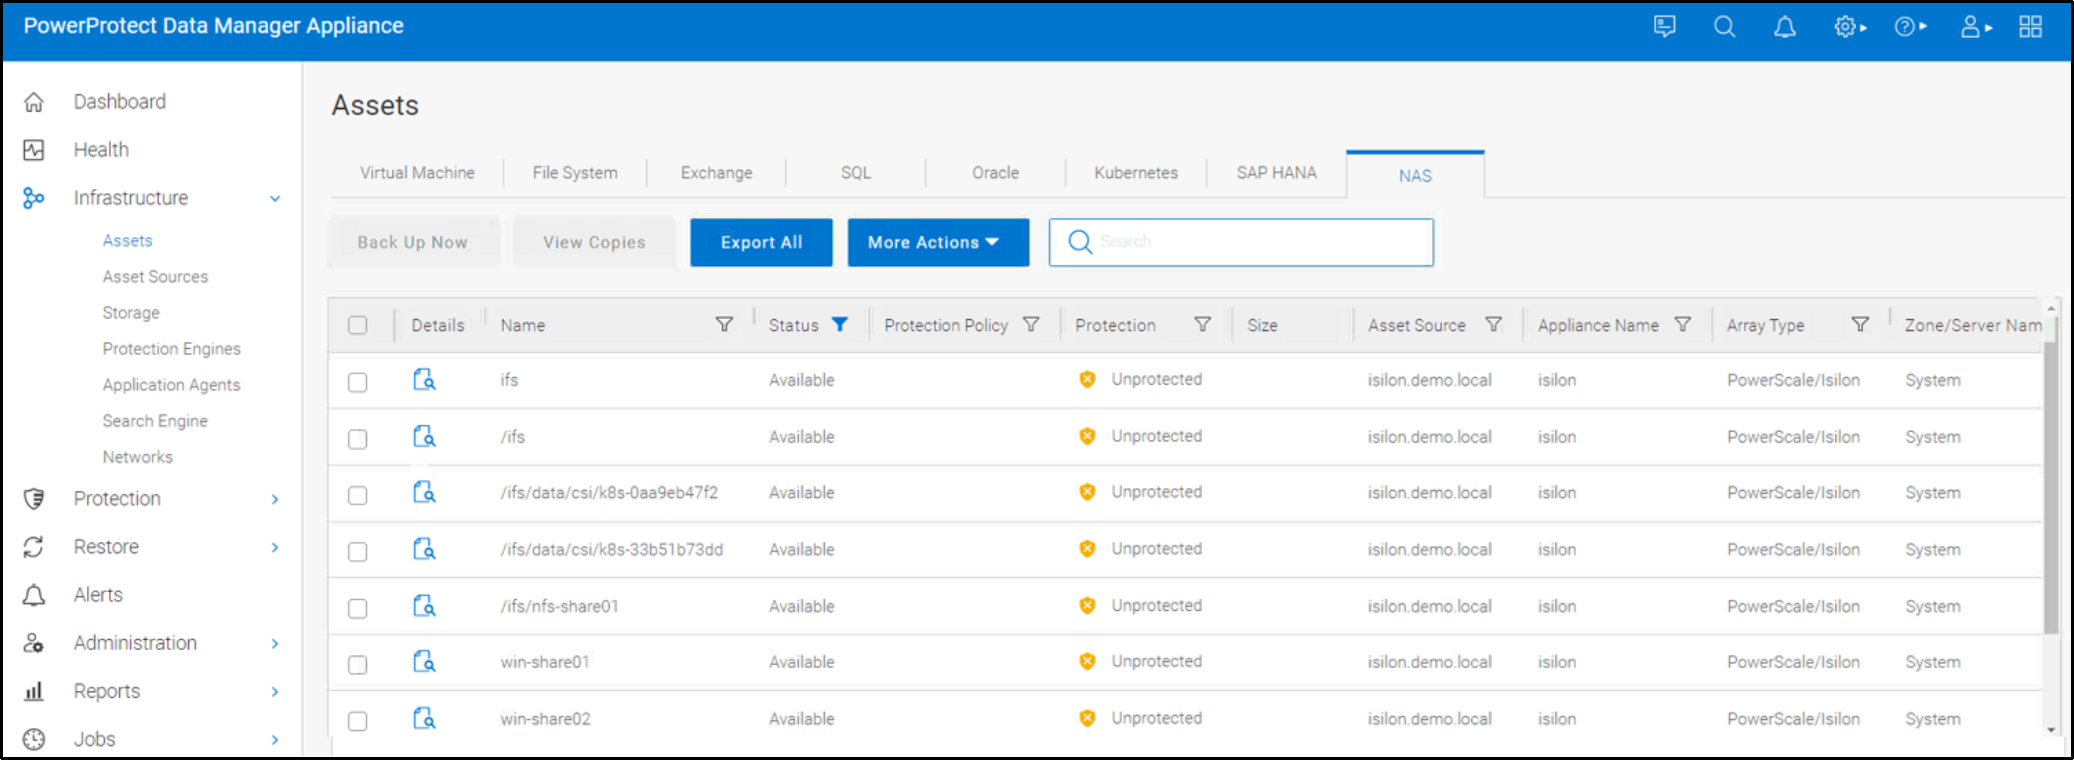 The image shows the NAS asset discovery in Data Manager Appliance UI.